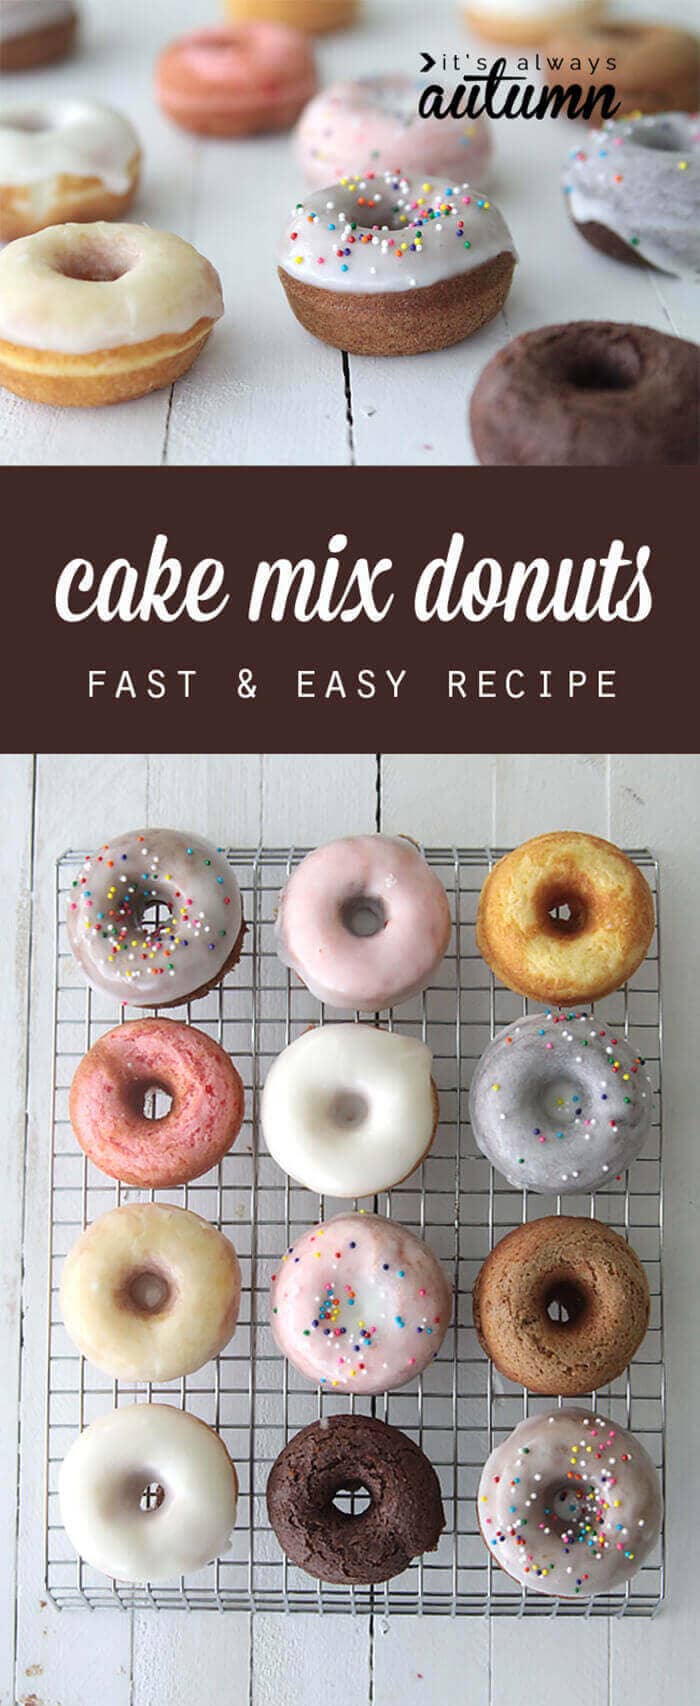 Quick and Easy (Baked) Cake Mix Donuts Recipe